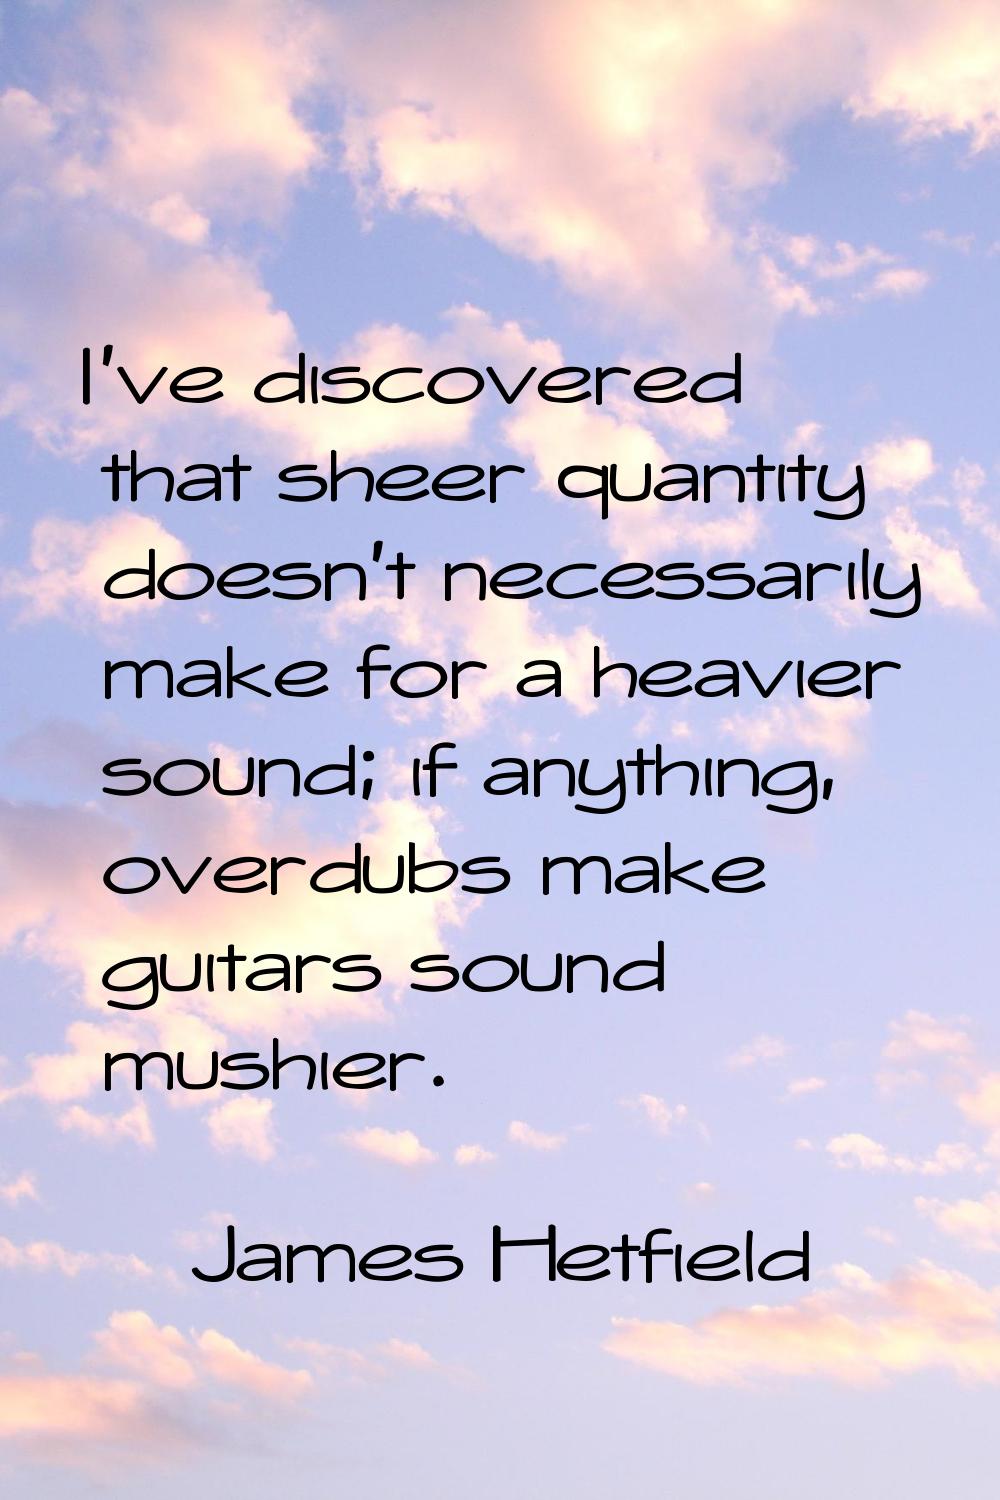 I've discovered that sheer quantity doesn't necessarily make for a heavier sound; if anything, over